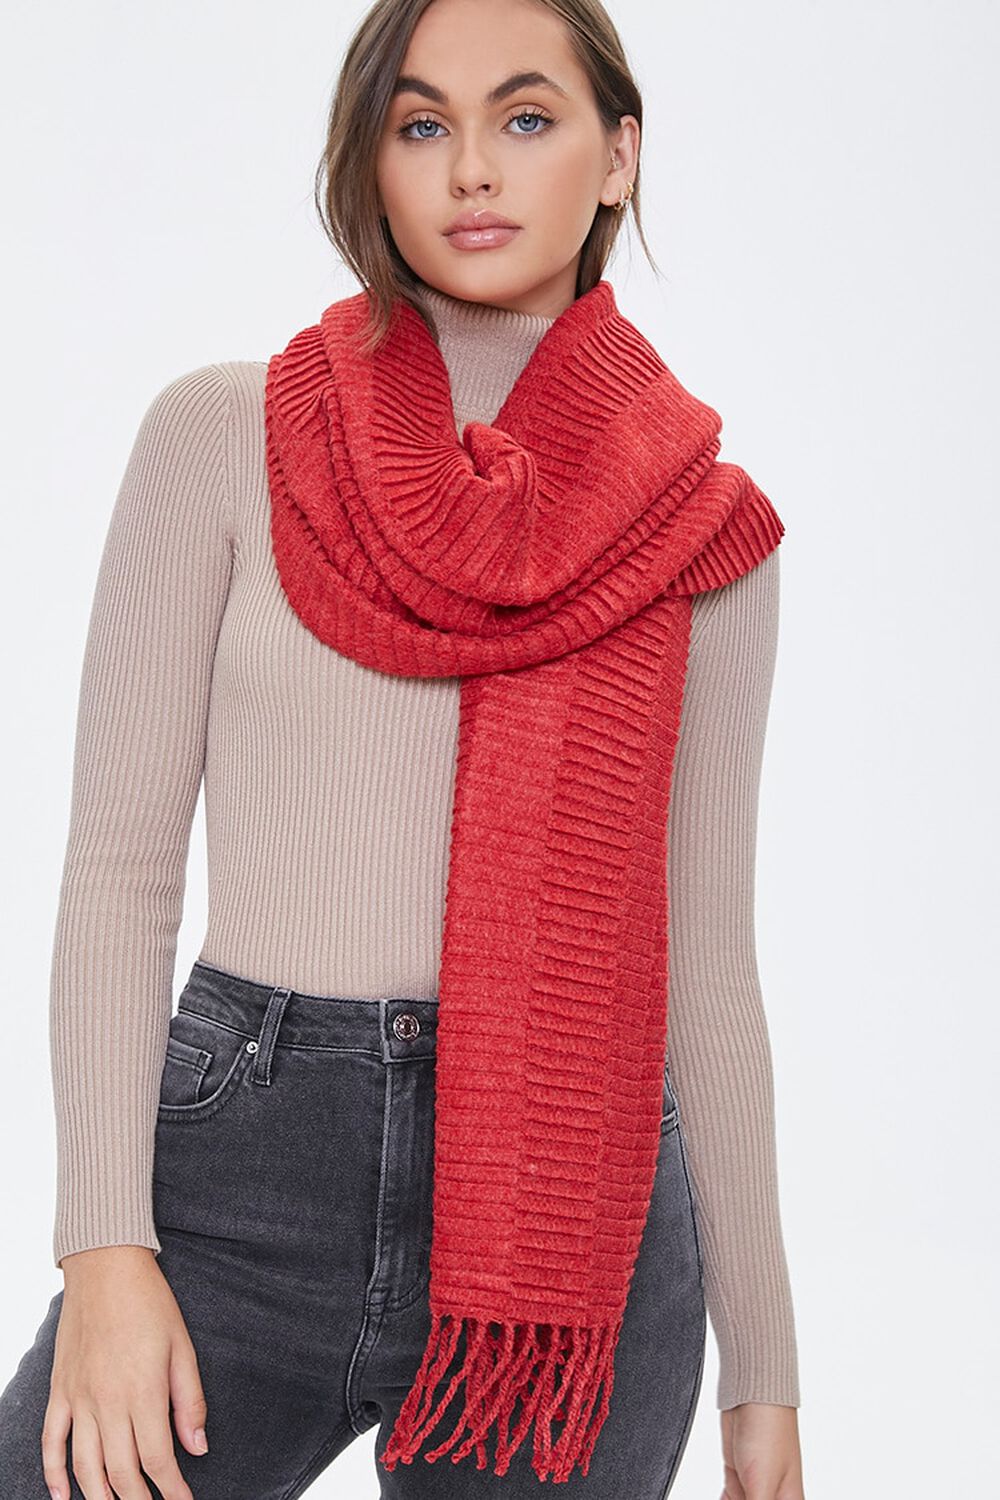 RED Pintucked Fringe Scarf, image 1